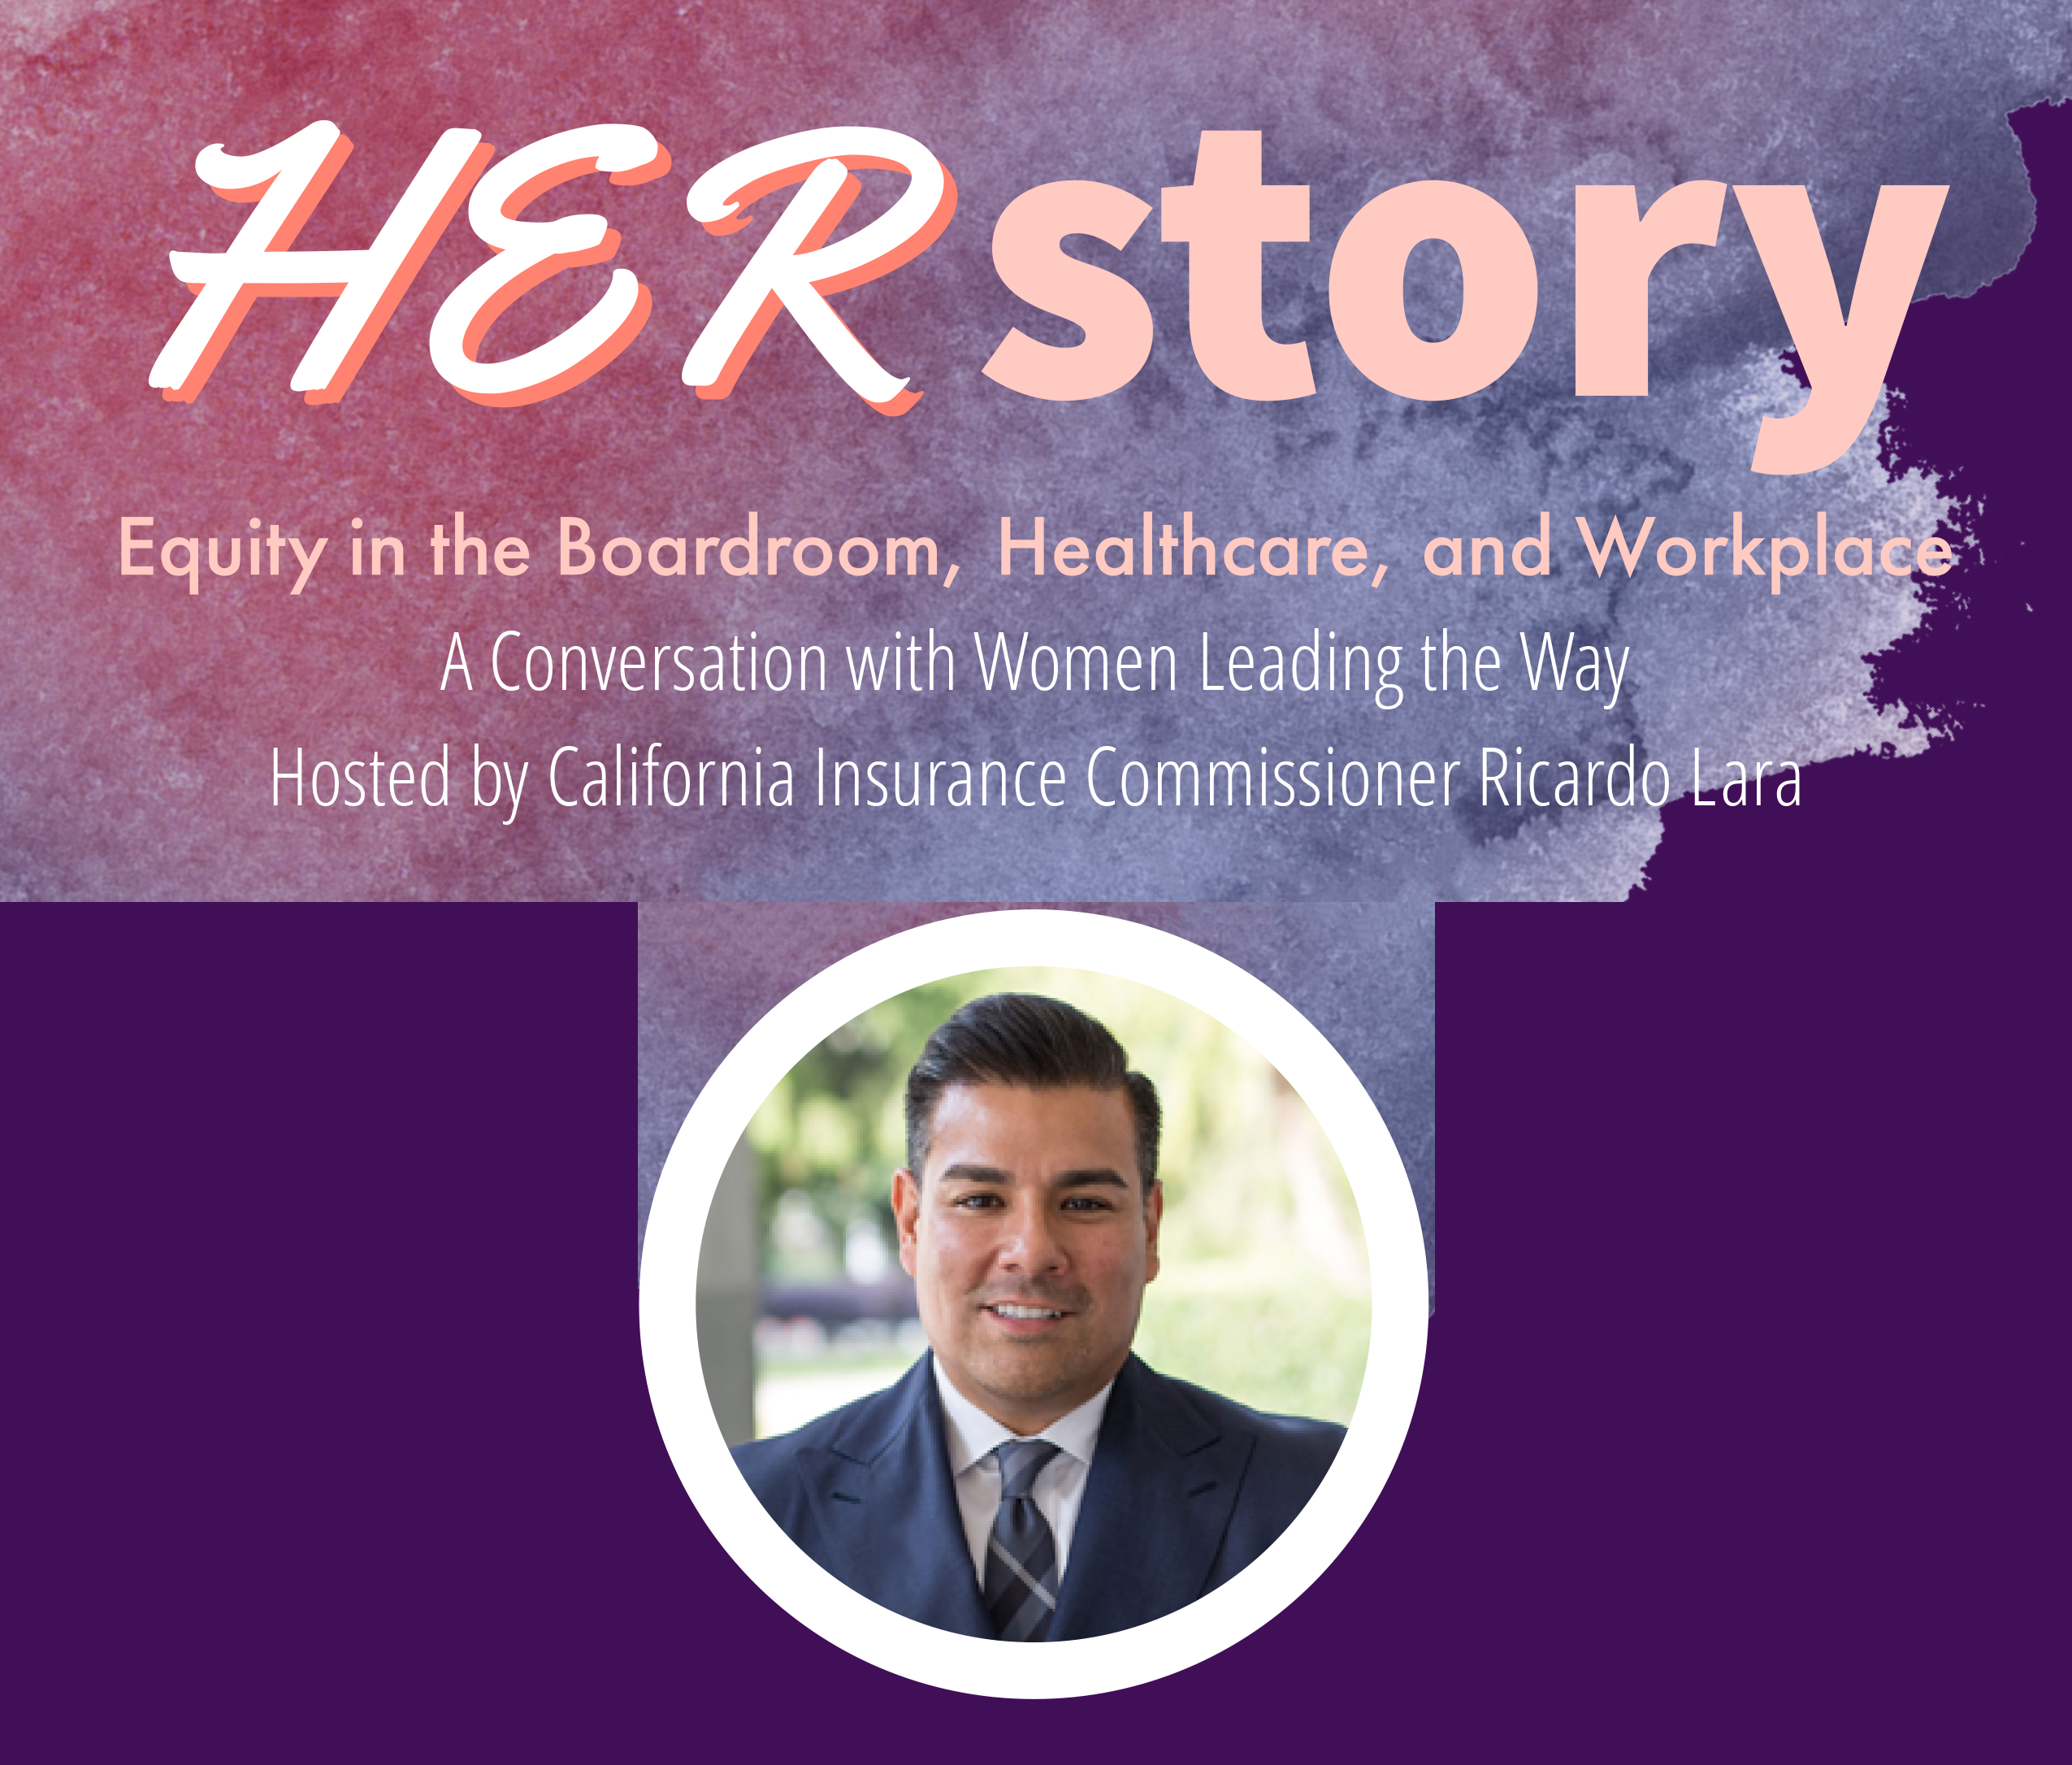 Equity in the Boardroom, Healthcare, and Workplace. A conversation with Women leading the way hosted by California Insurance commissioner Ricardo Lara